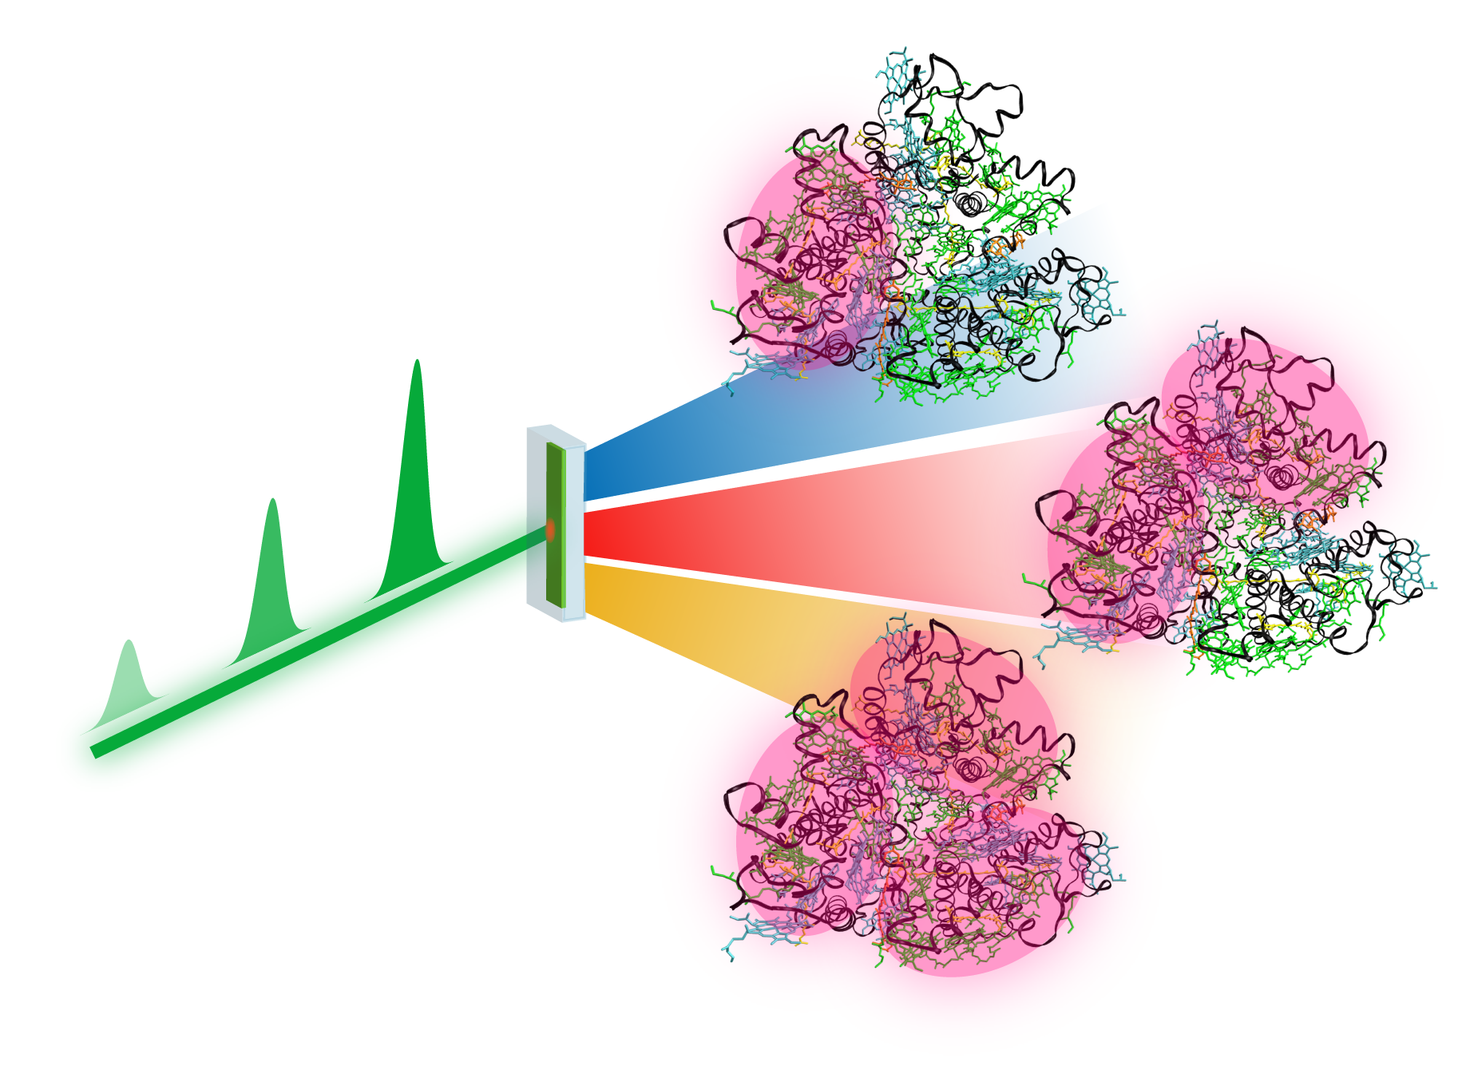 In the new method, laser pulses of different power (green) are combined in such a way that single excitation (blue), double excitation (red) and triple excitation (yellow) can be distinguished, for example, in biological light-harvesting complexes (Image: Julian Lüttig, University of Würzburg).